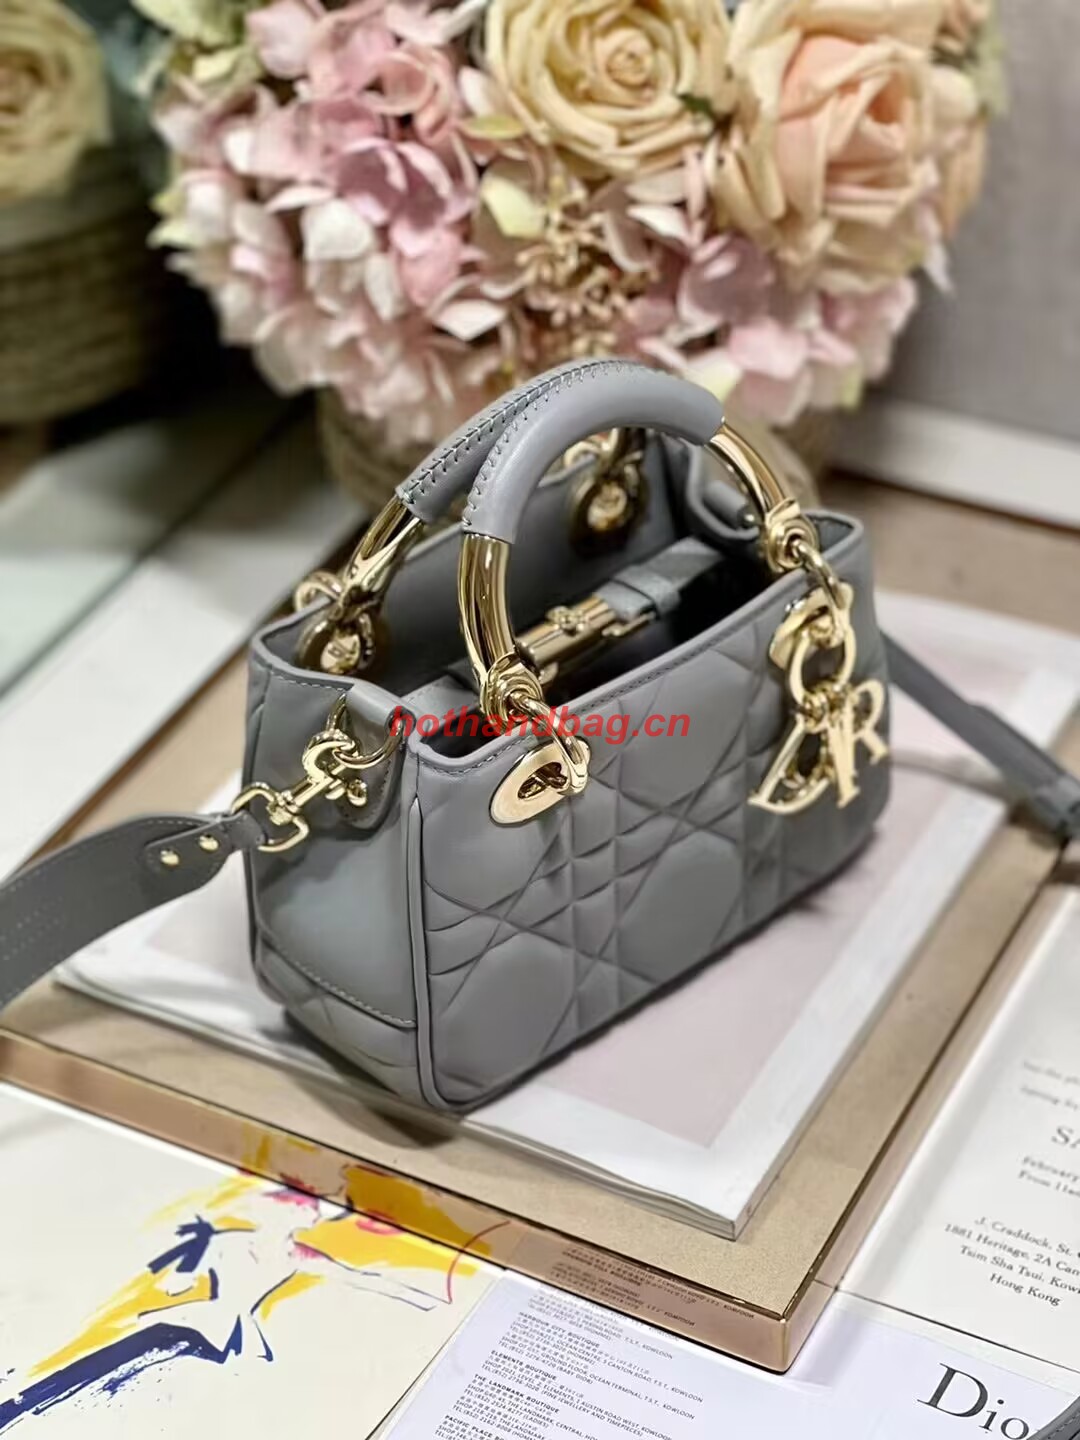 LADY DIOR TOP HANDLE SMALL BAG Cannage Lambskin C0620 gray